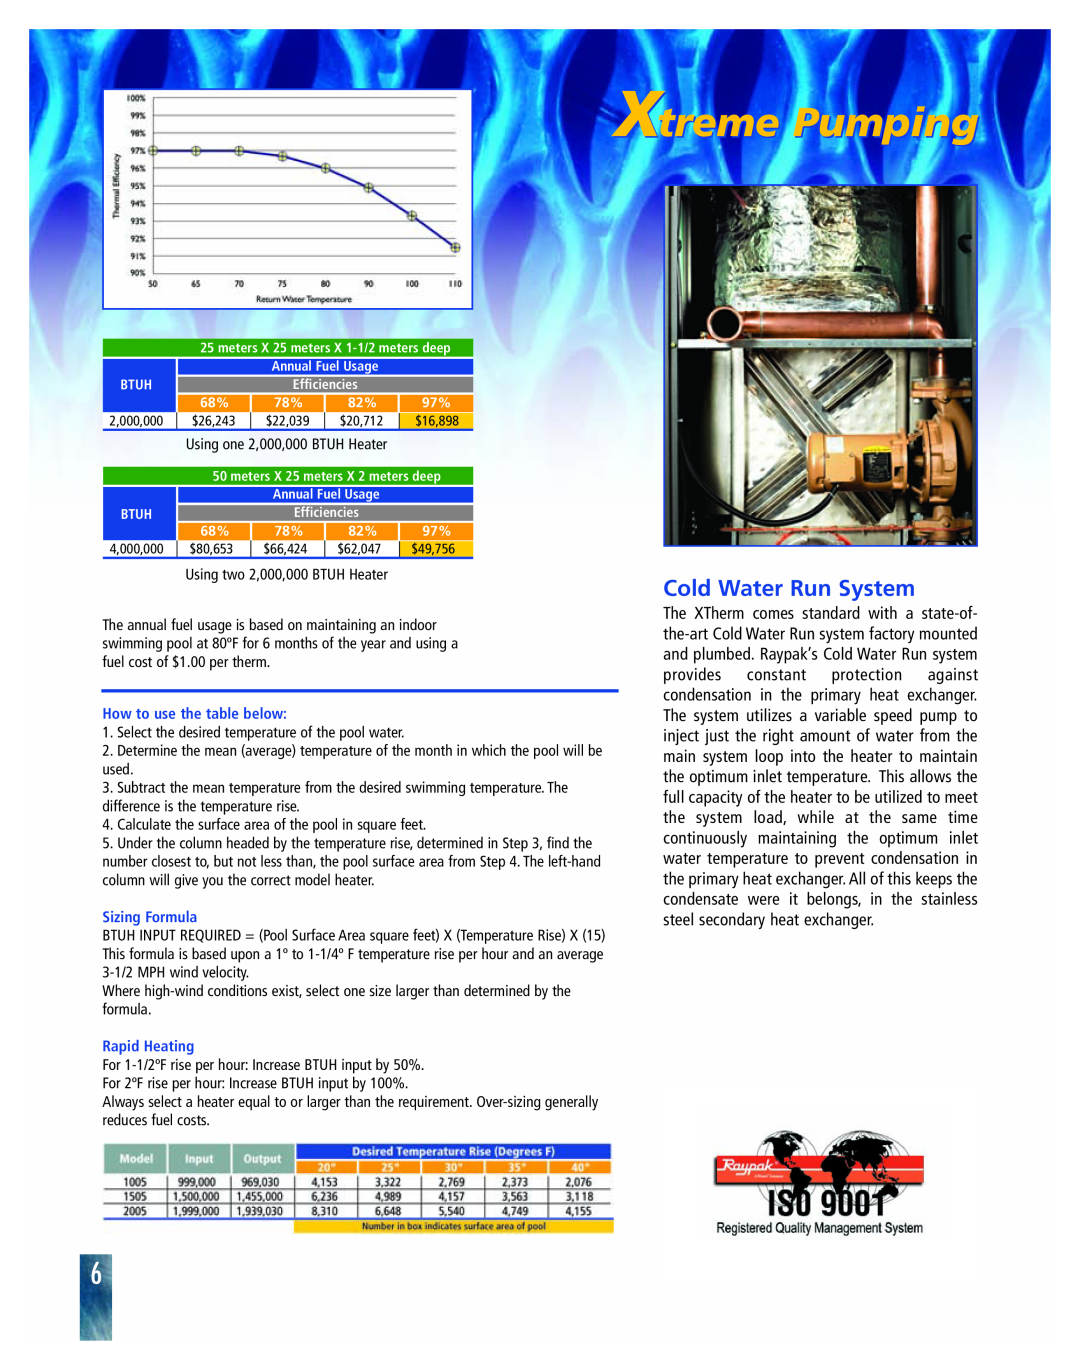 Raypak 1505, 2005 brochure Xtreme Pumping, Cold Water Run System, How to use the table below, Sizing Formula, Rapid Heating 